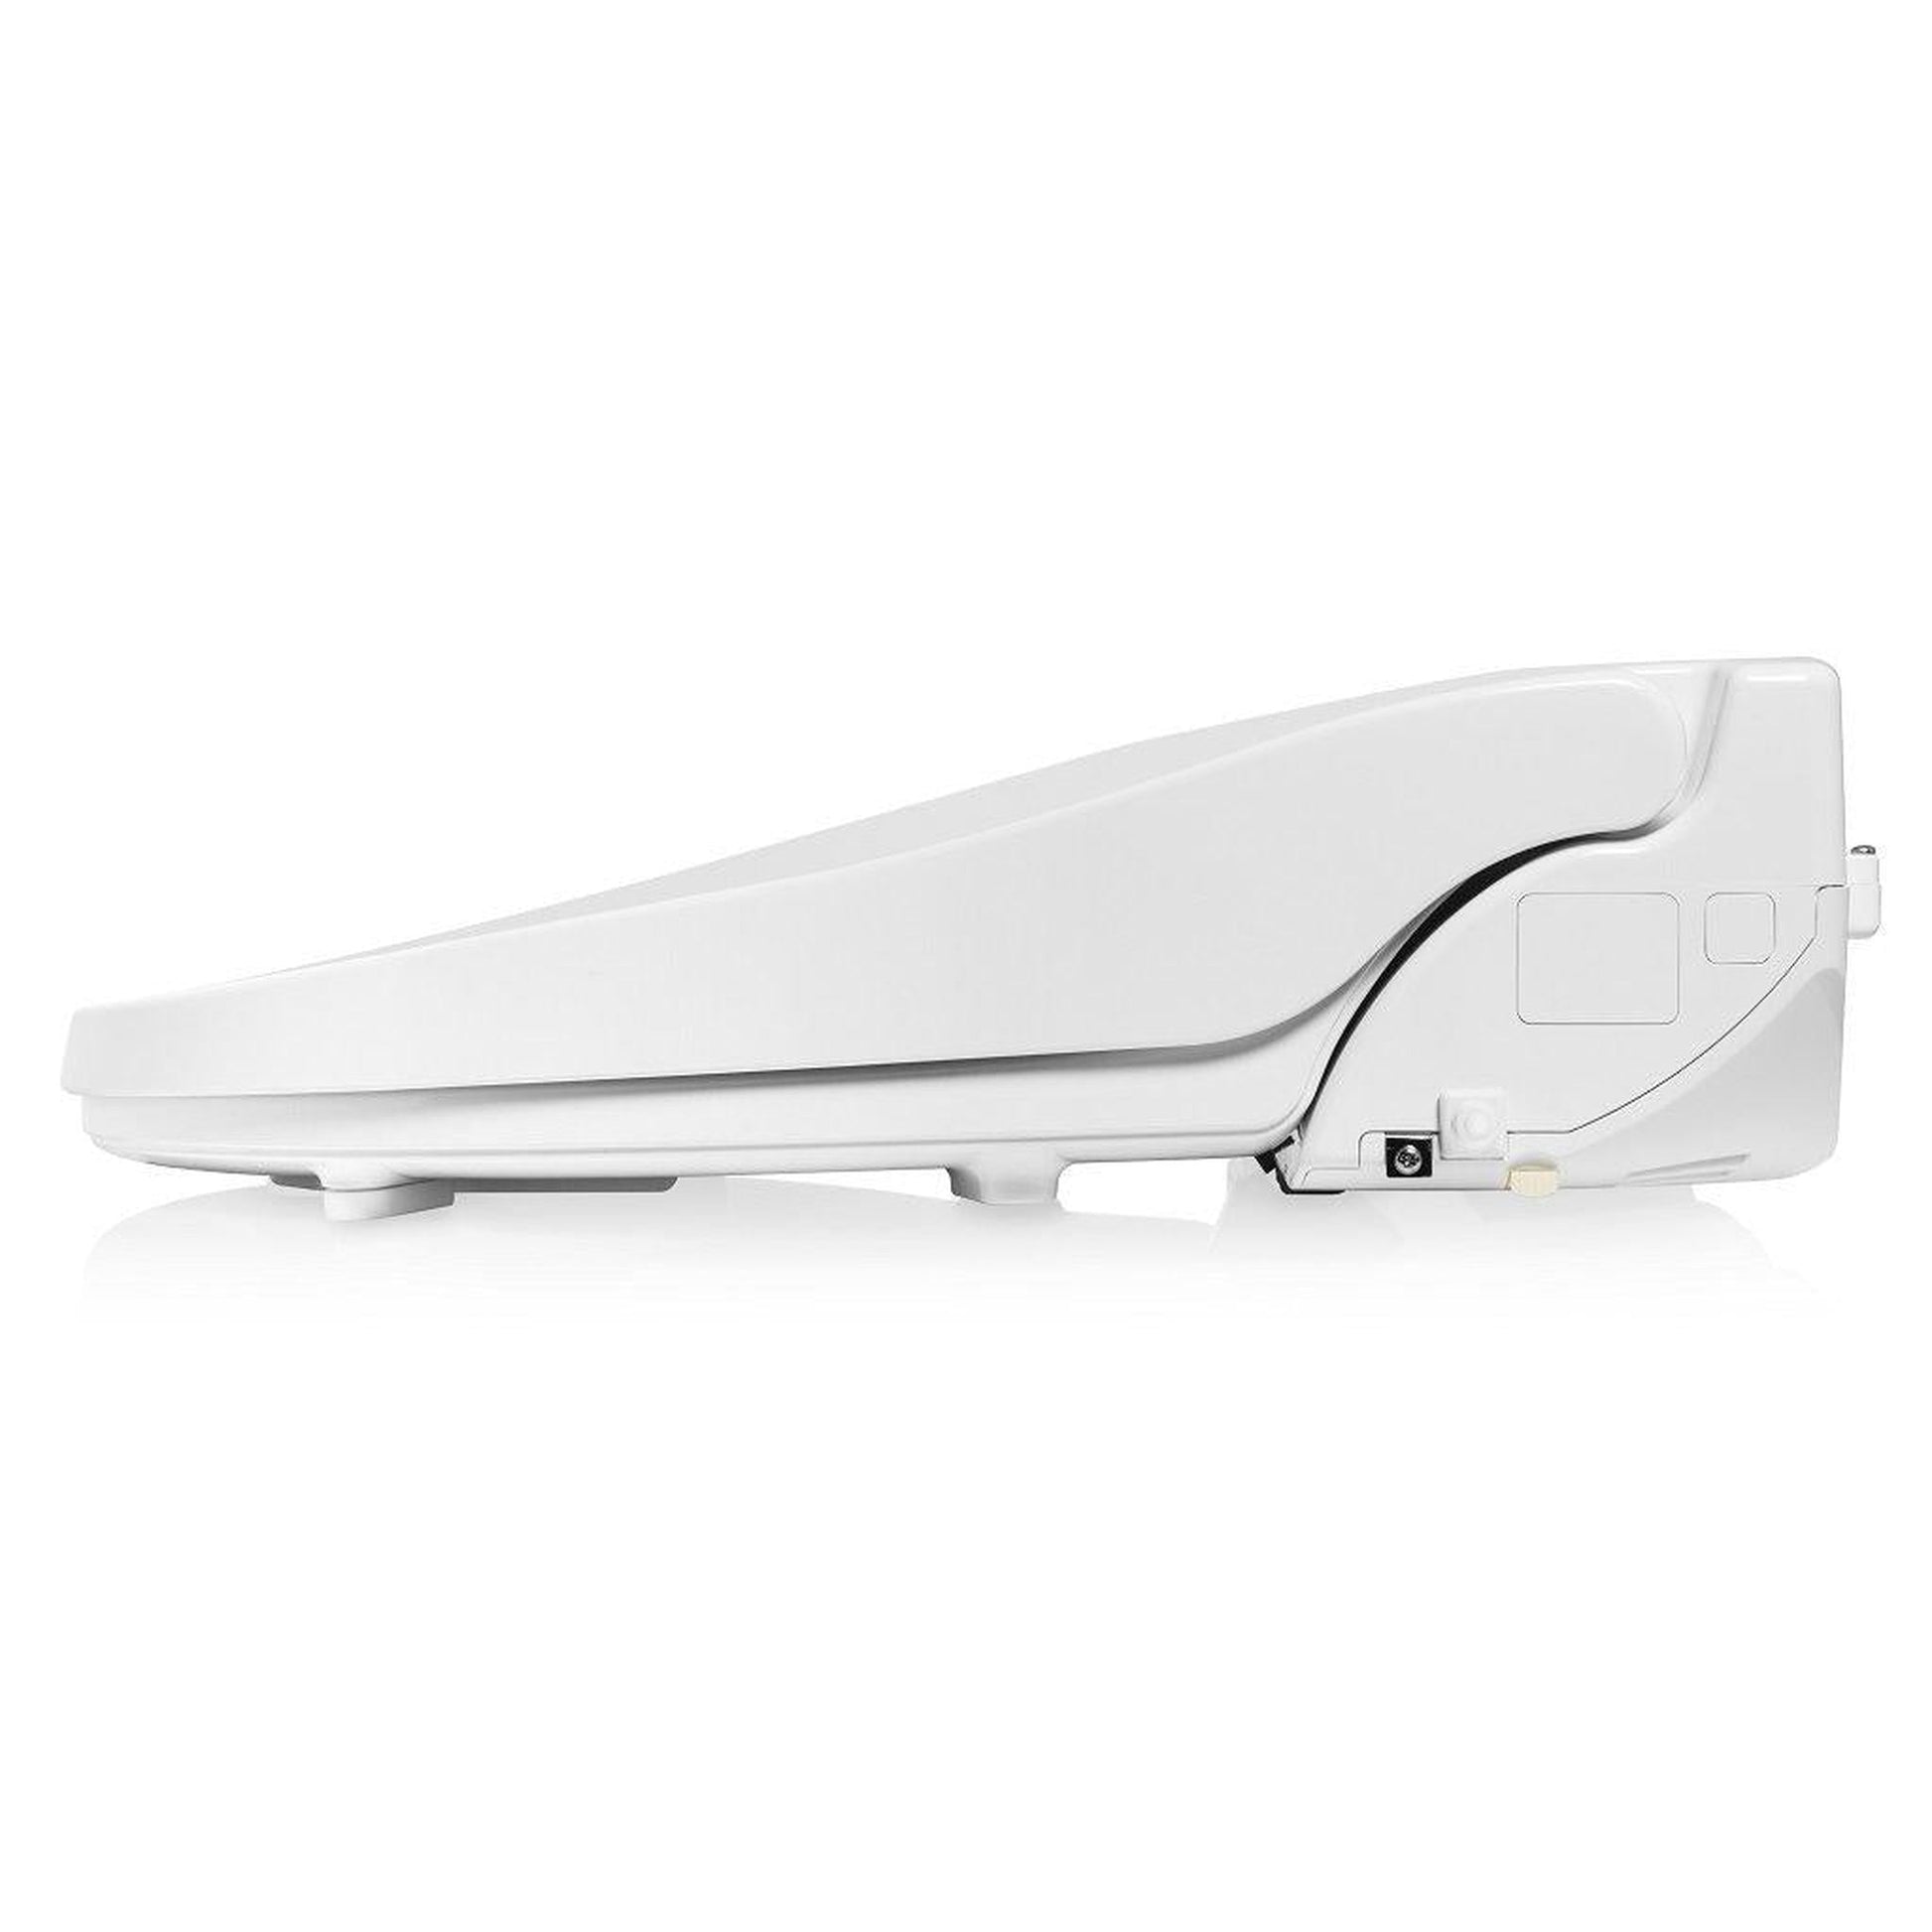 Brondell Swash Select BL67 20.7" White Elongated Electric Advanced Bidet Toilet Seat With Side Control Panel